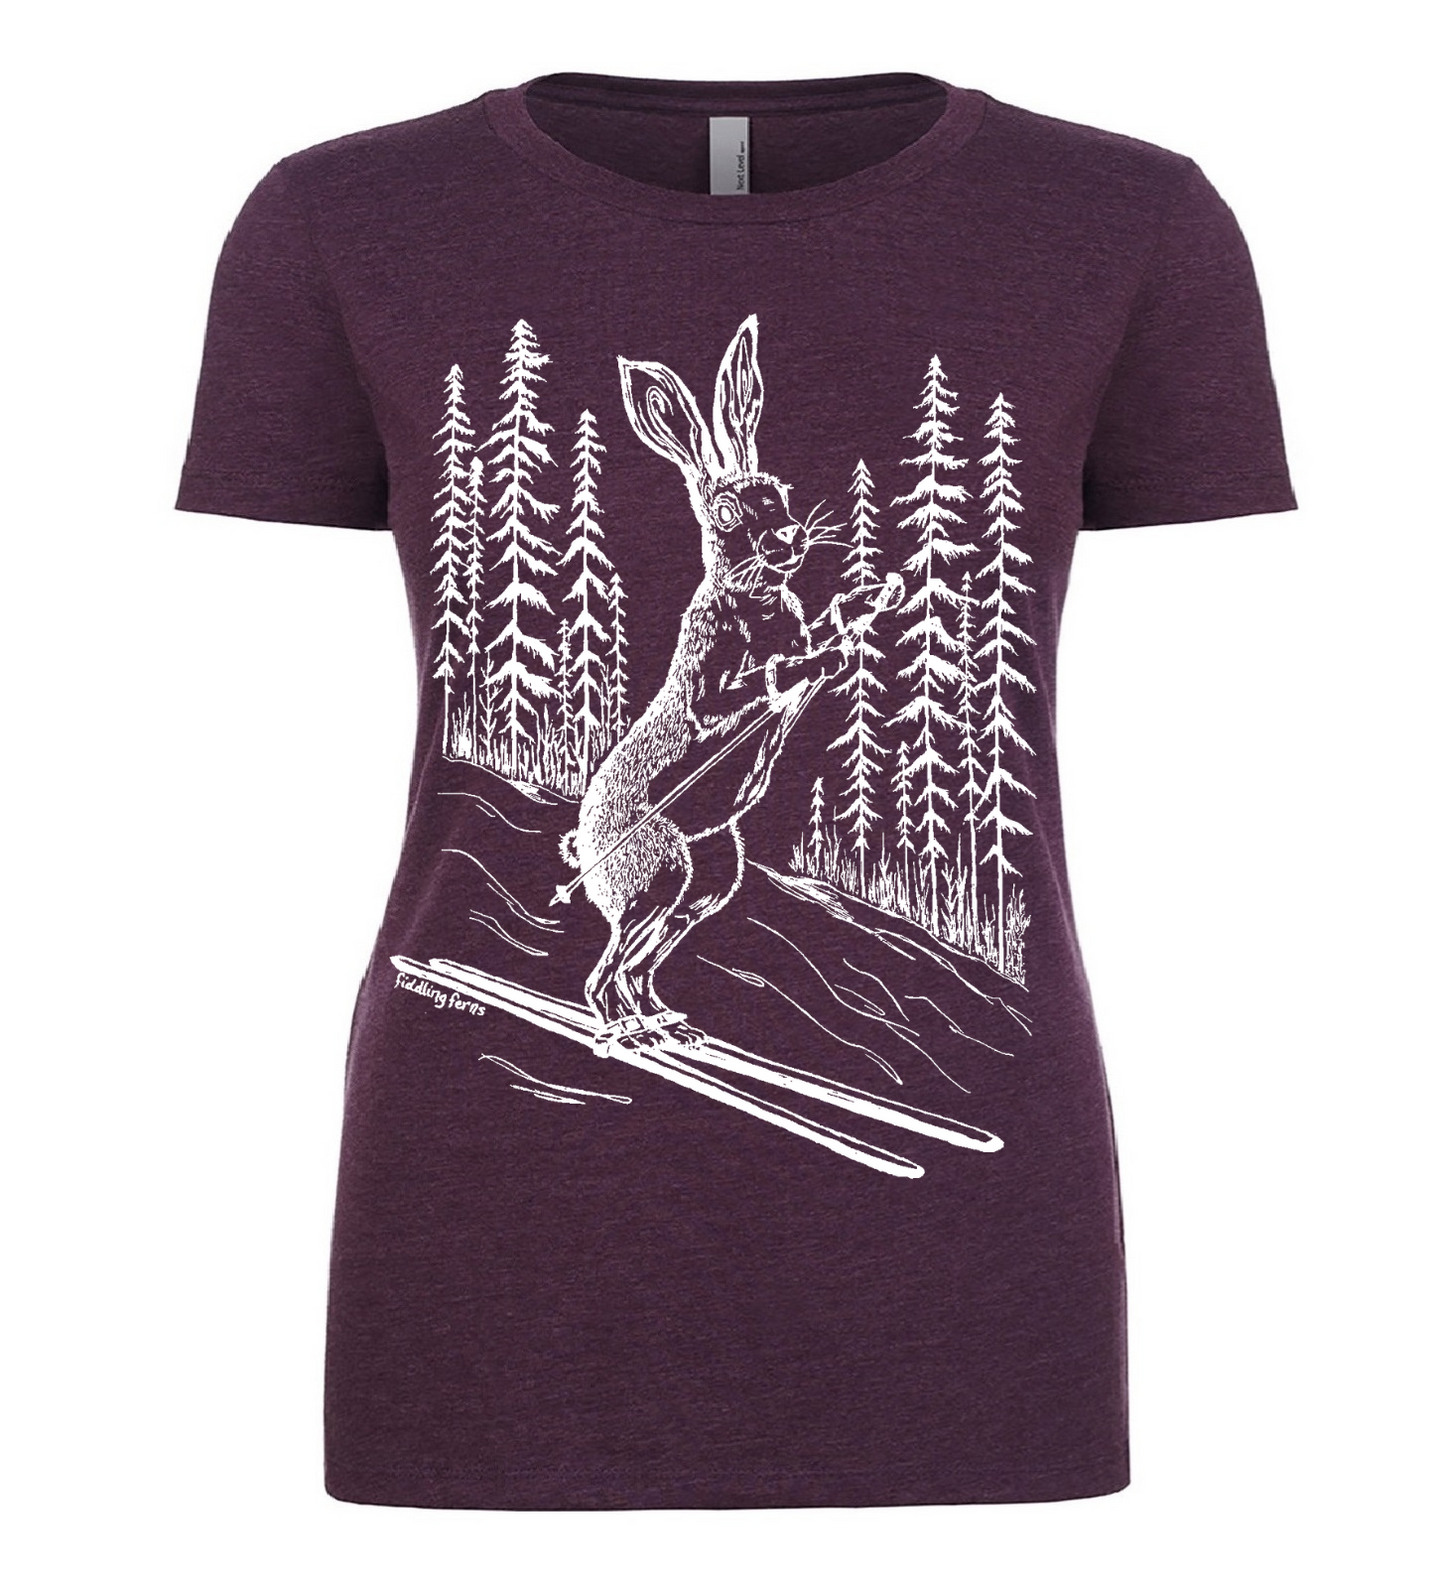 The Bunny Hill Ladies T Shirt